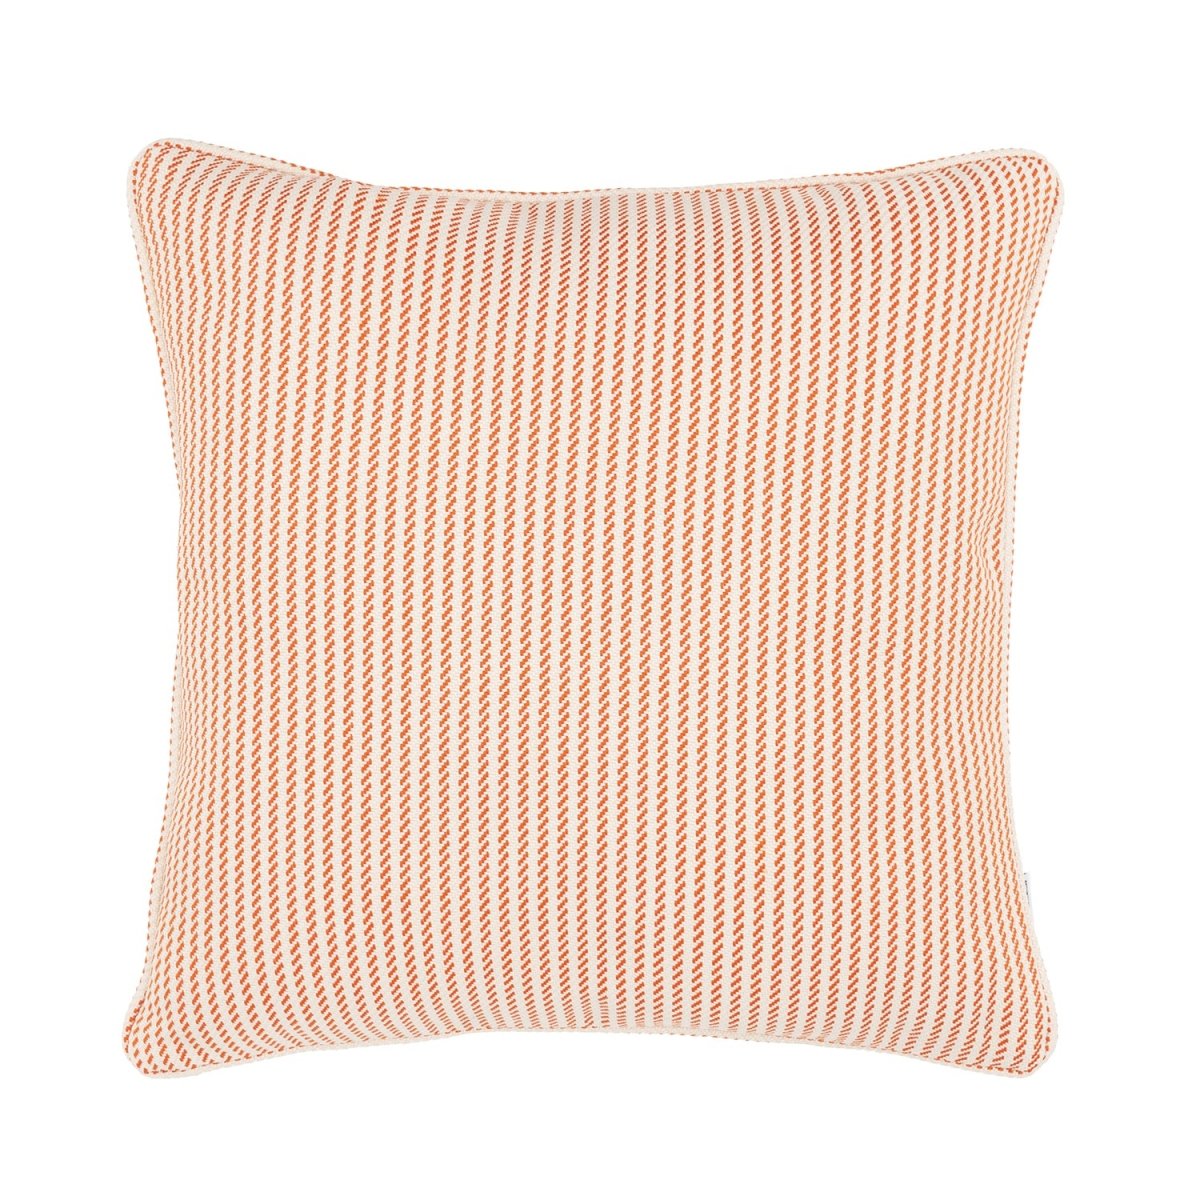 Summertime Scatter Cushions